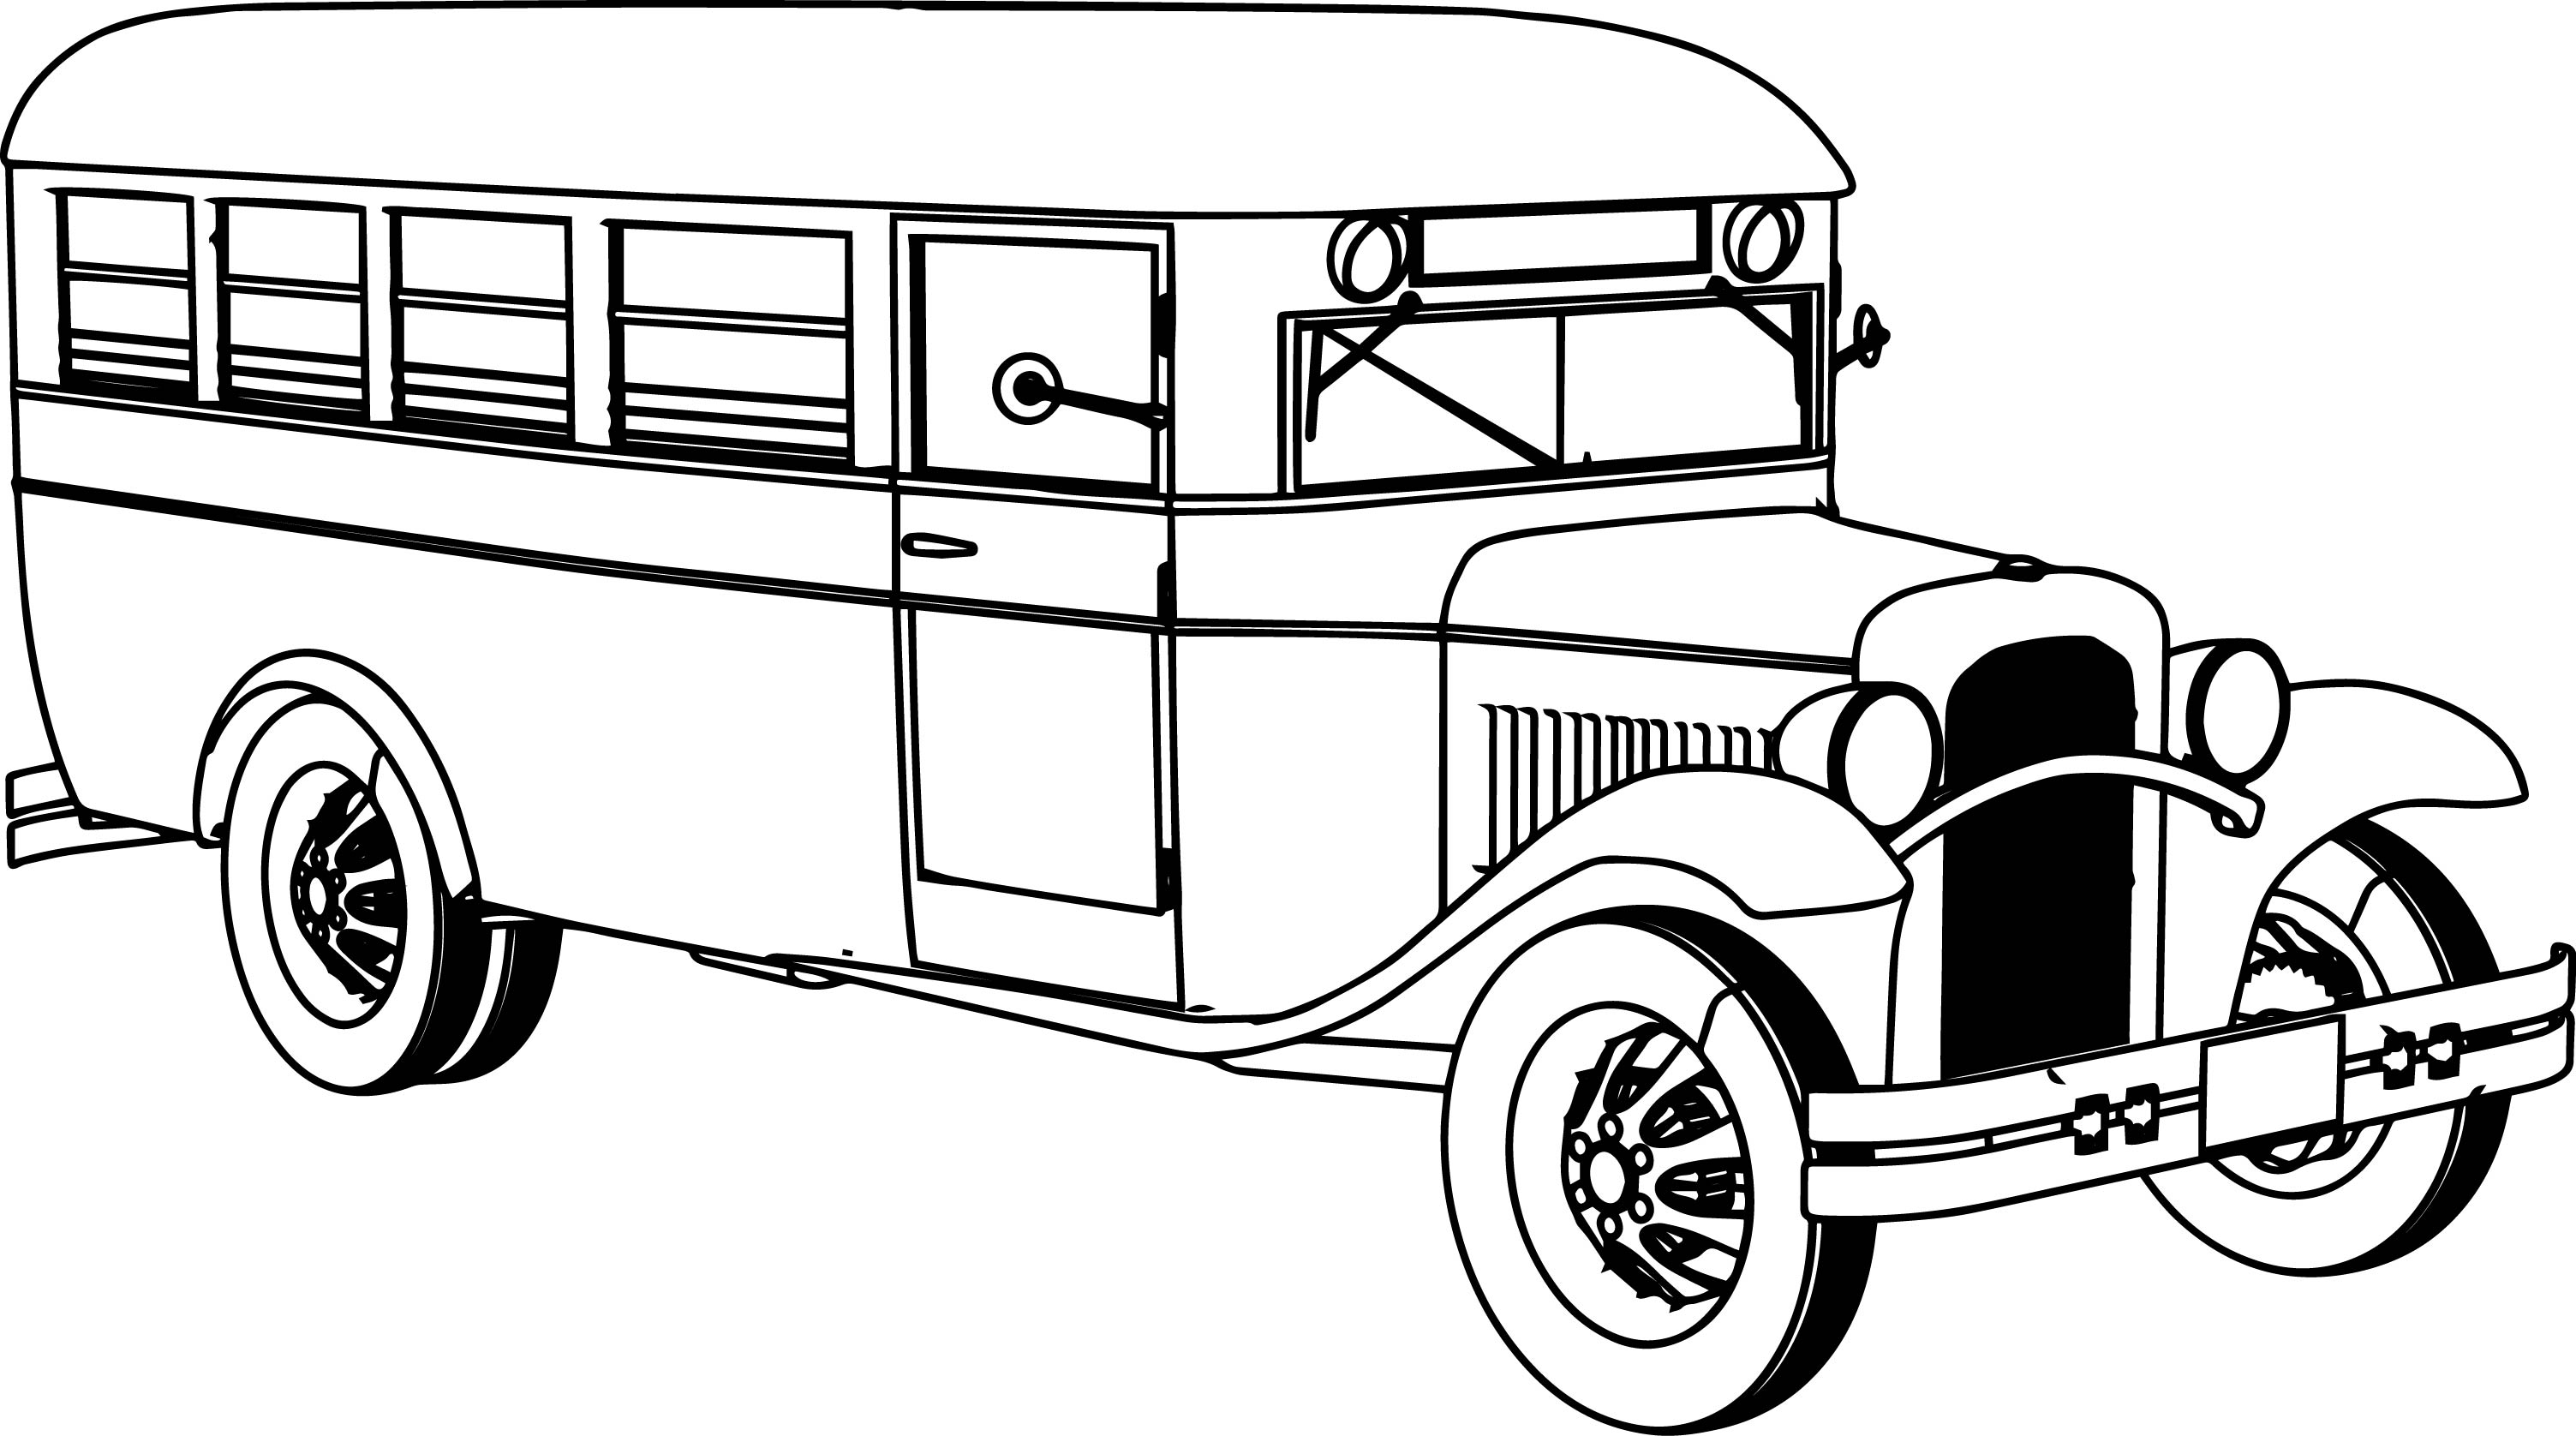 Old School Bus Coloring Page | Wecoloringpage